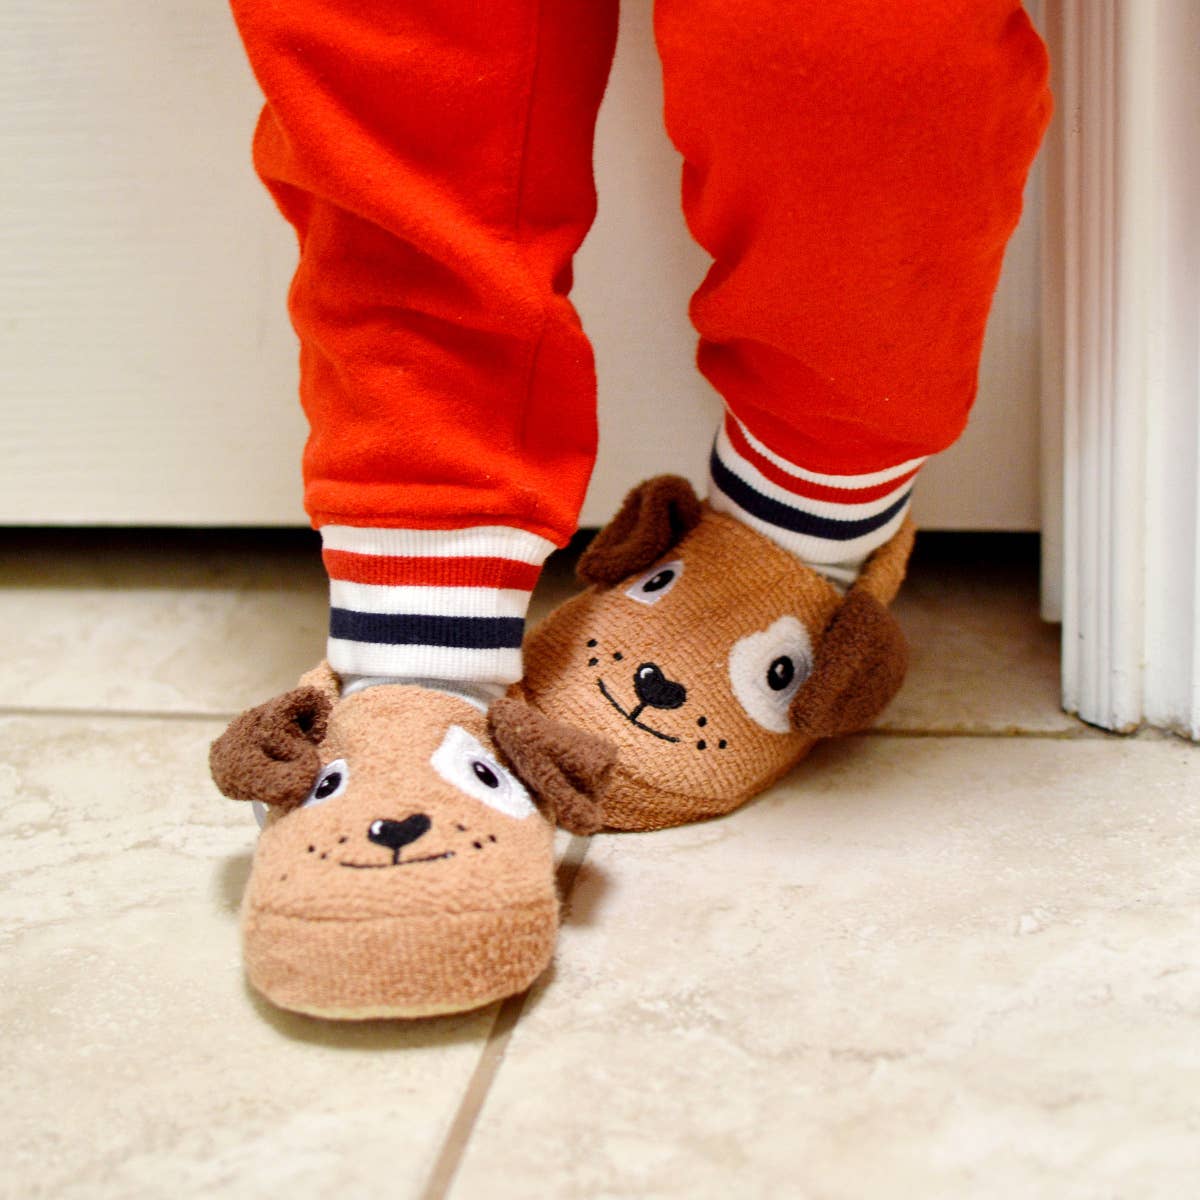 Puppy Dog Slippers (Kids ages 2-4)